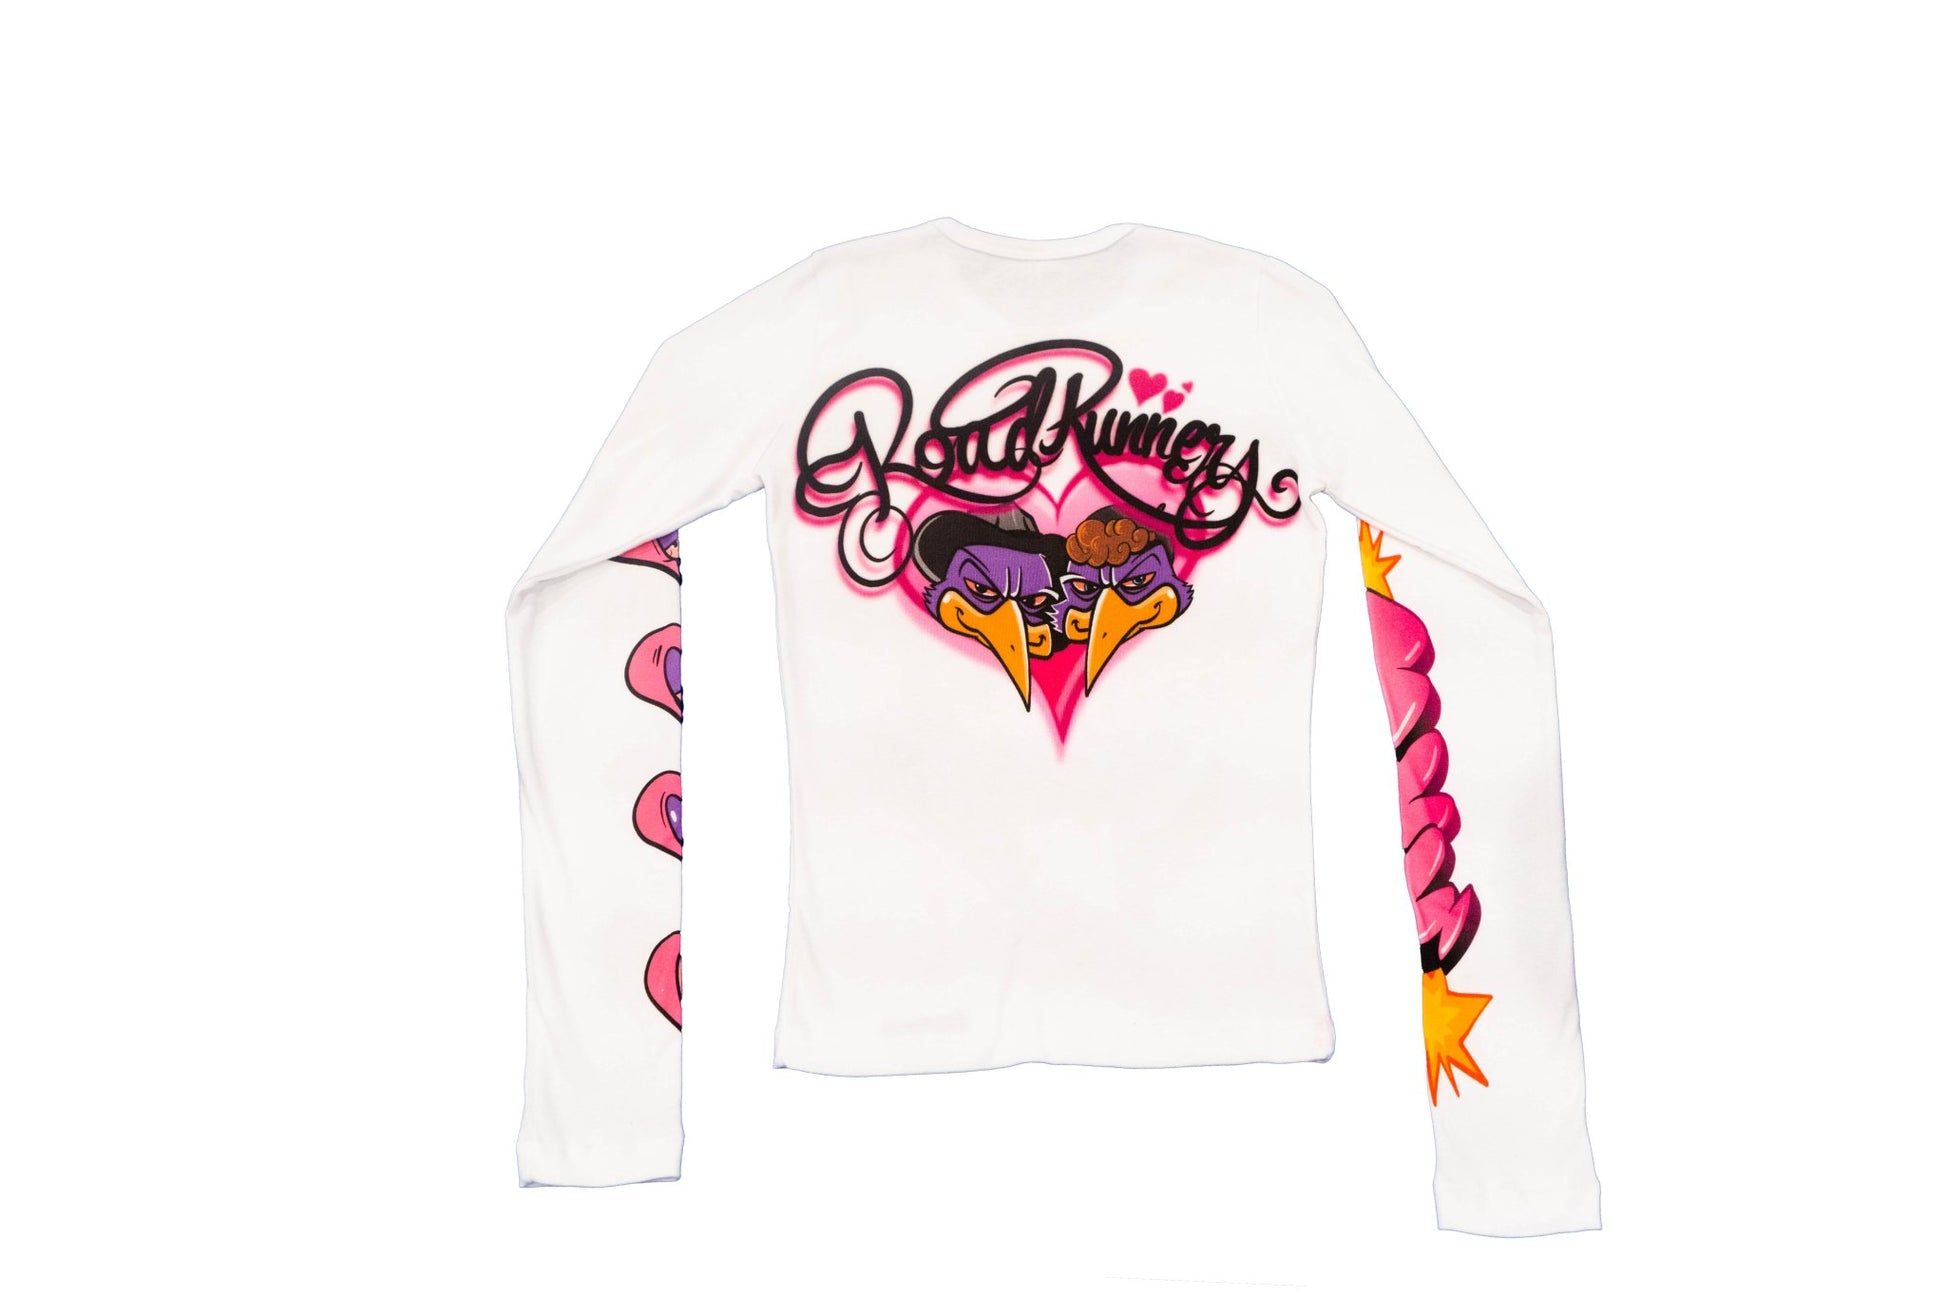 Bonnie & Clyde Women’s Crop Top (white) - Road Runners World Global